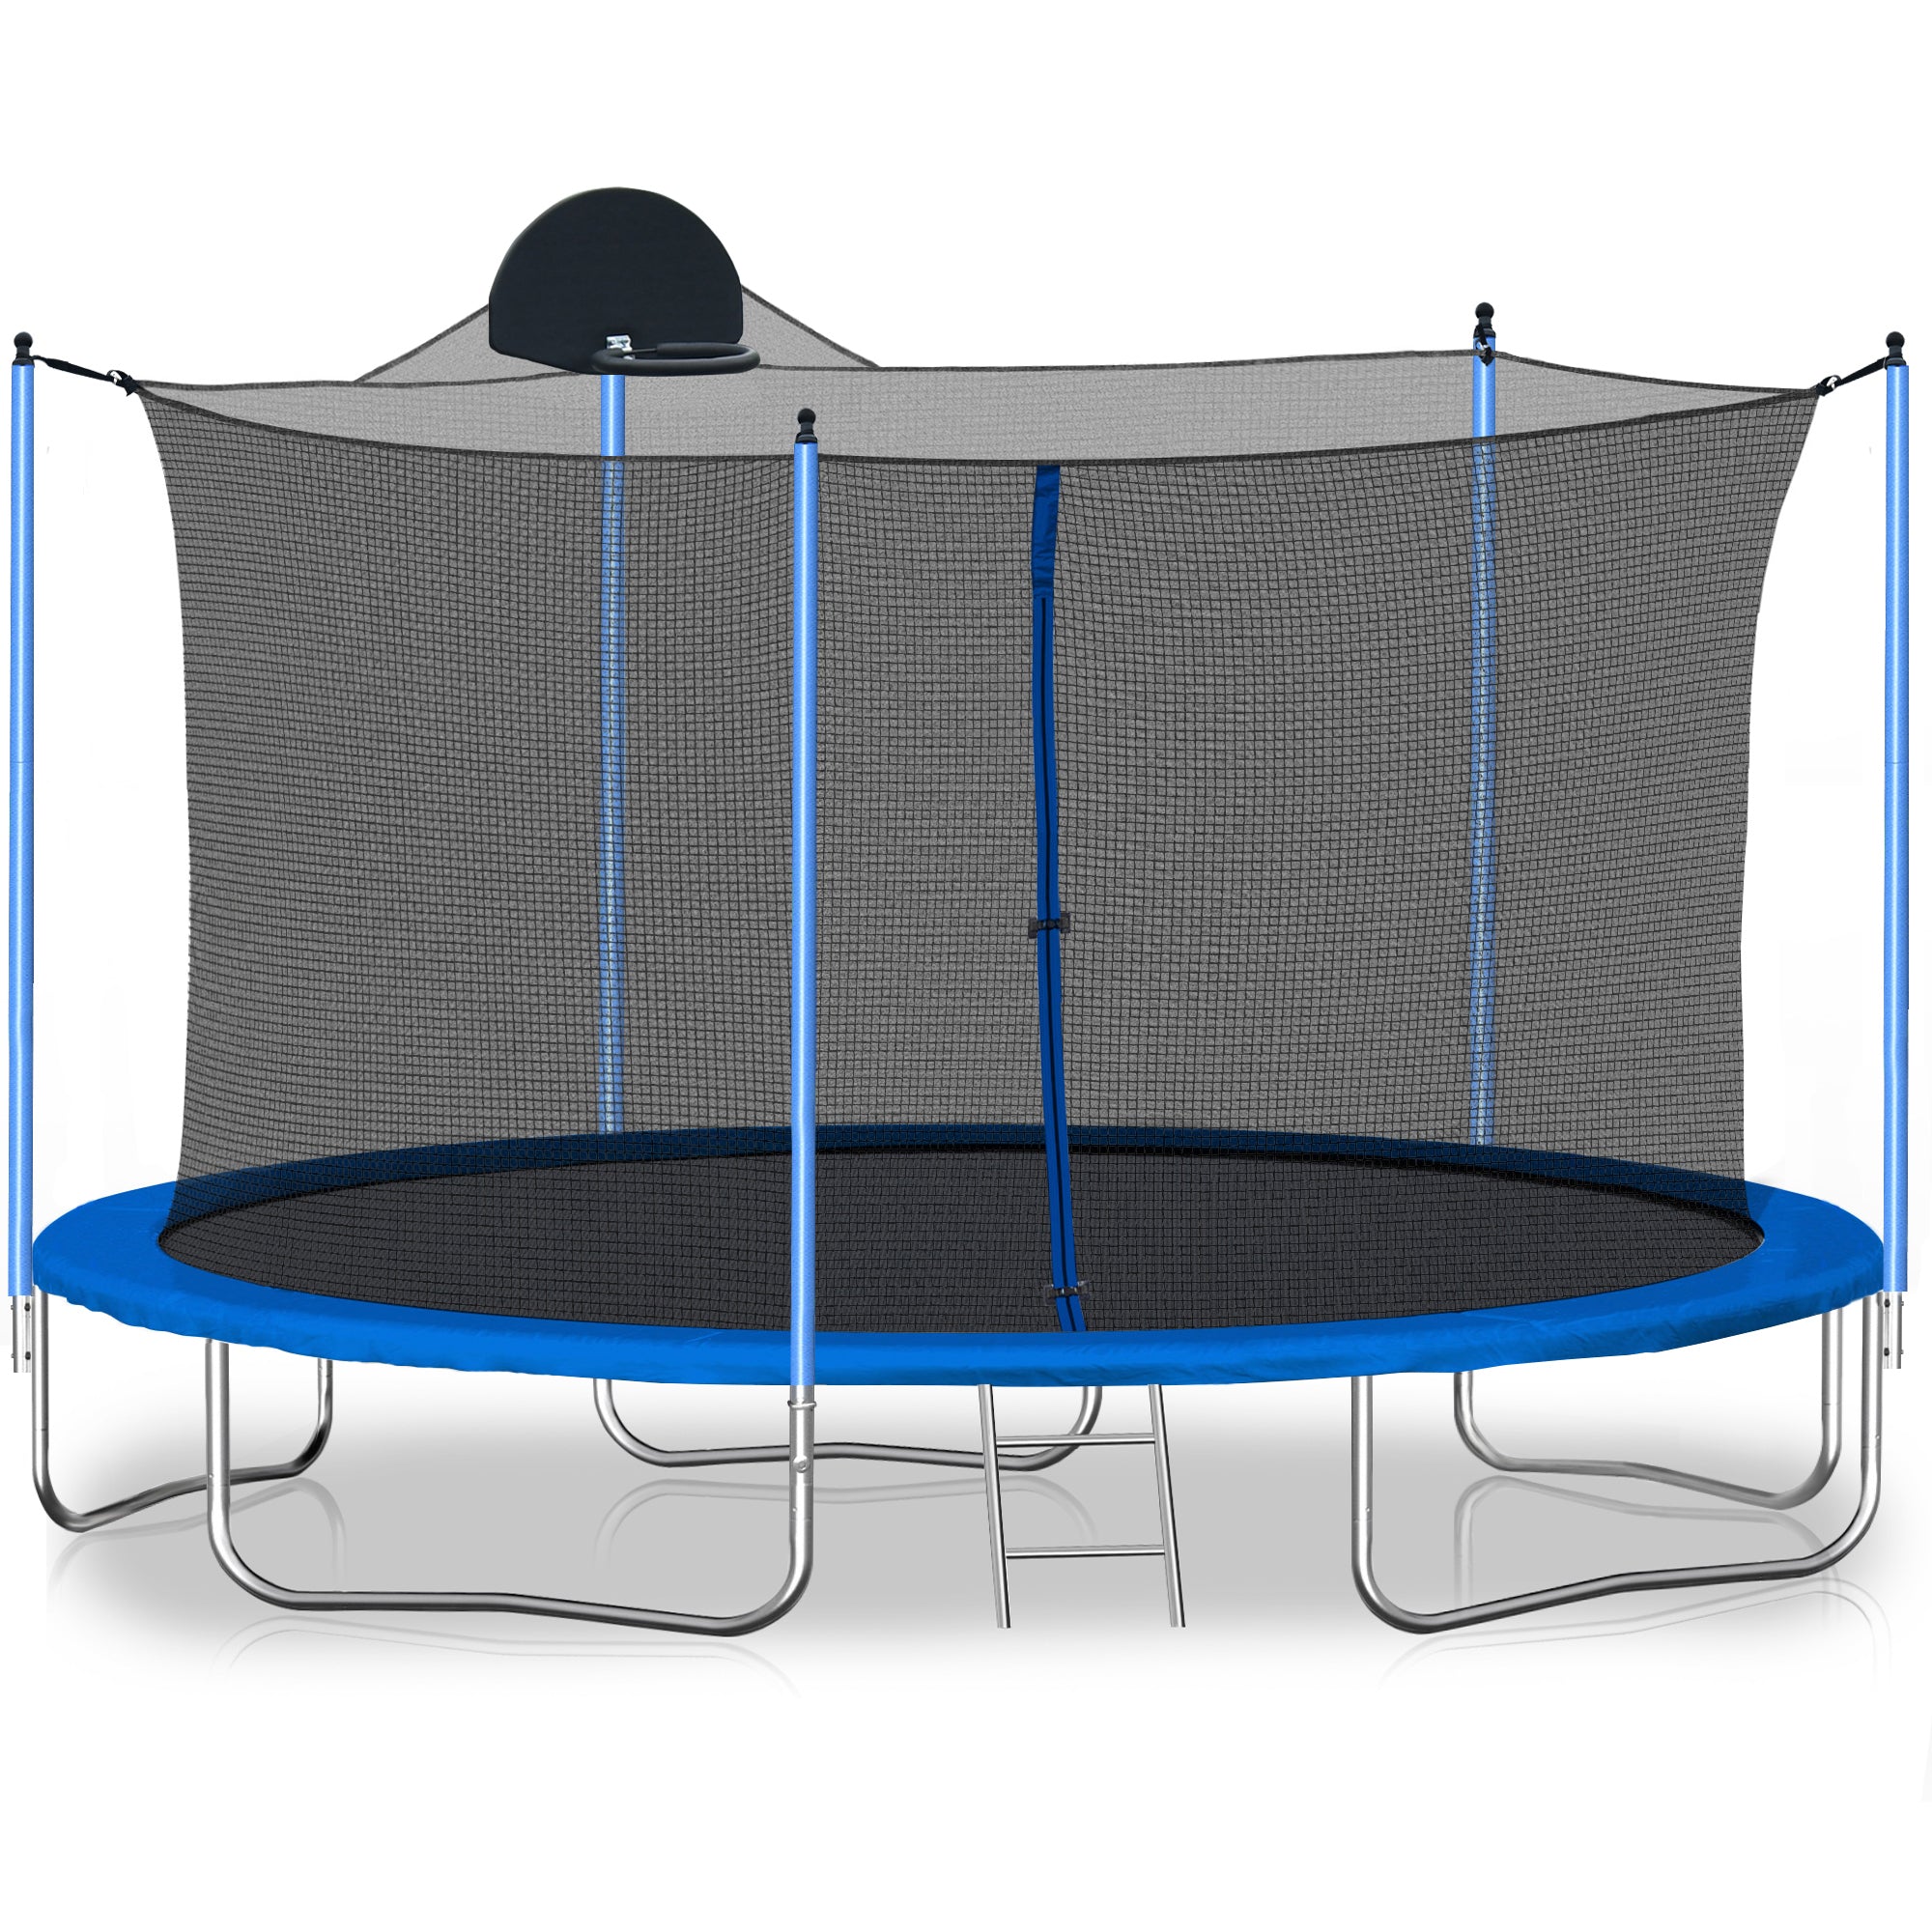 12FT Trampoline for Adults & Kids with Basketball blue-metal